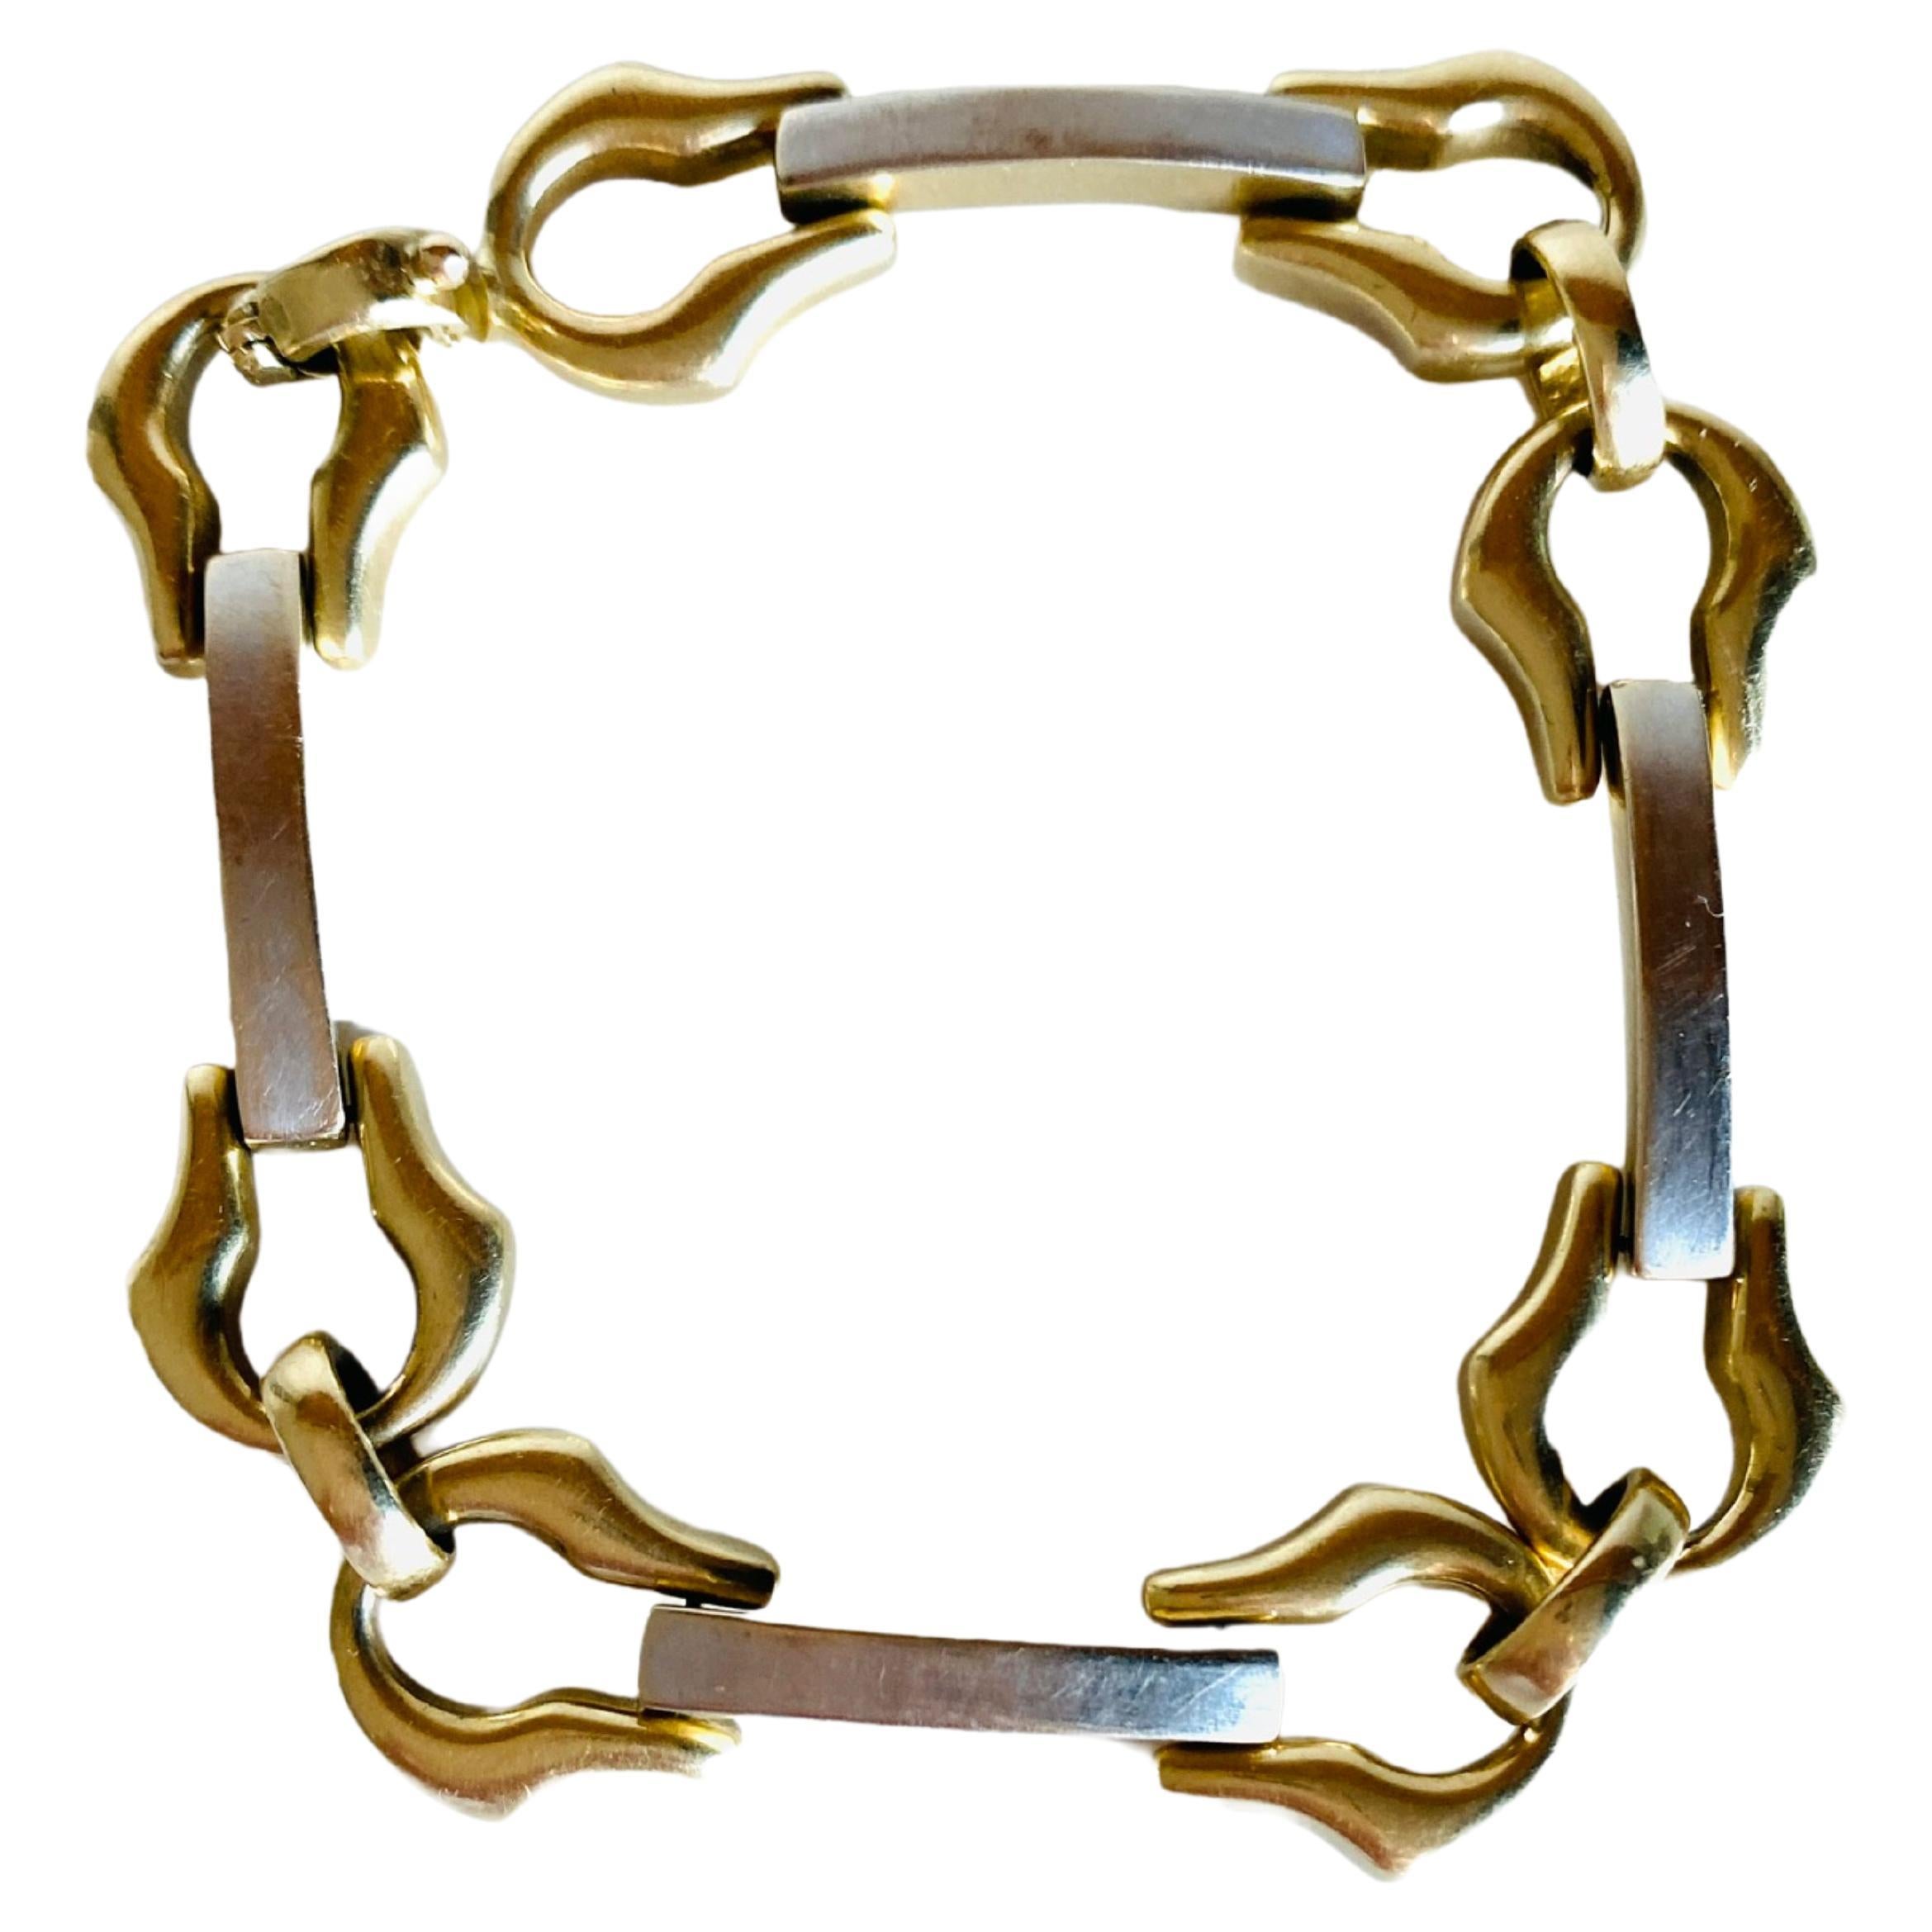 1940s 14k Italian Yellow & White Gold Retro Bracelet Horse Bit Cable Chain Link For Sale